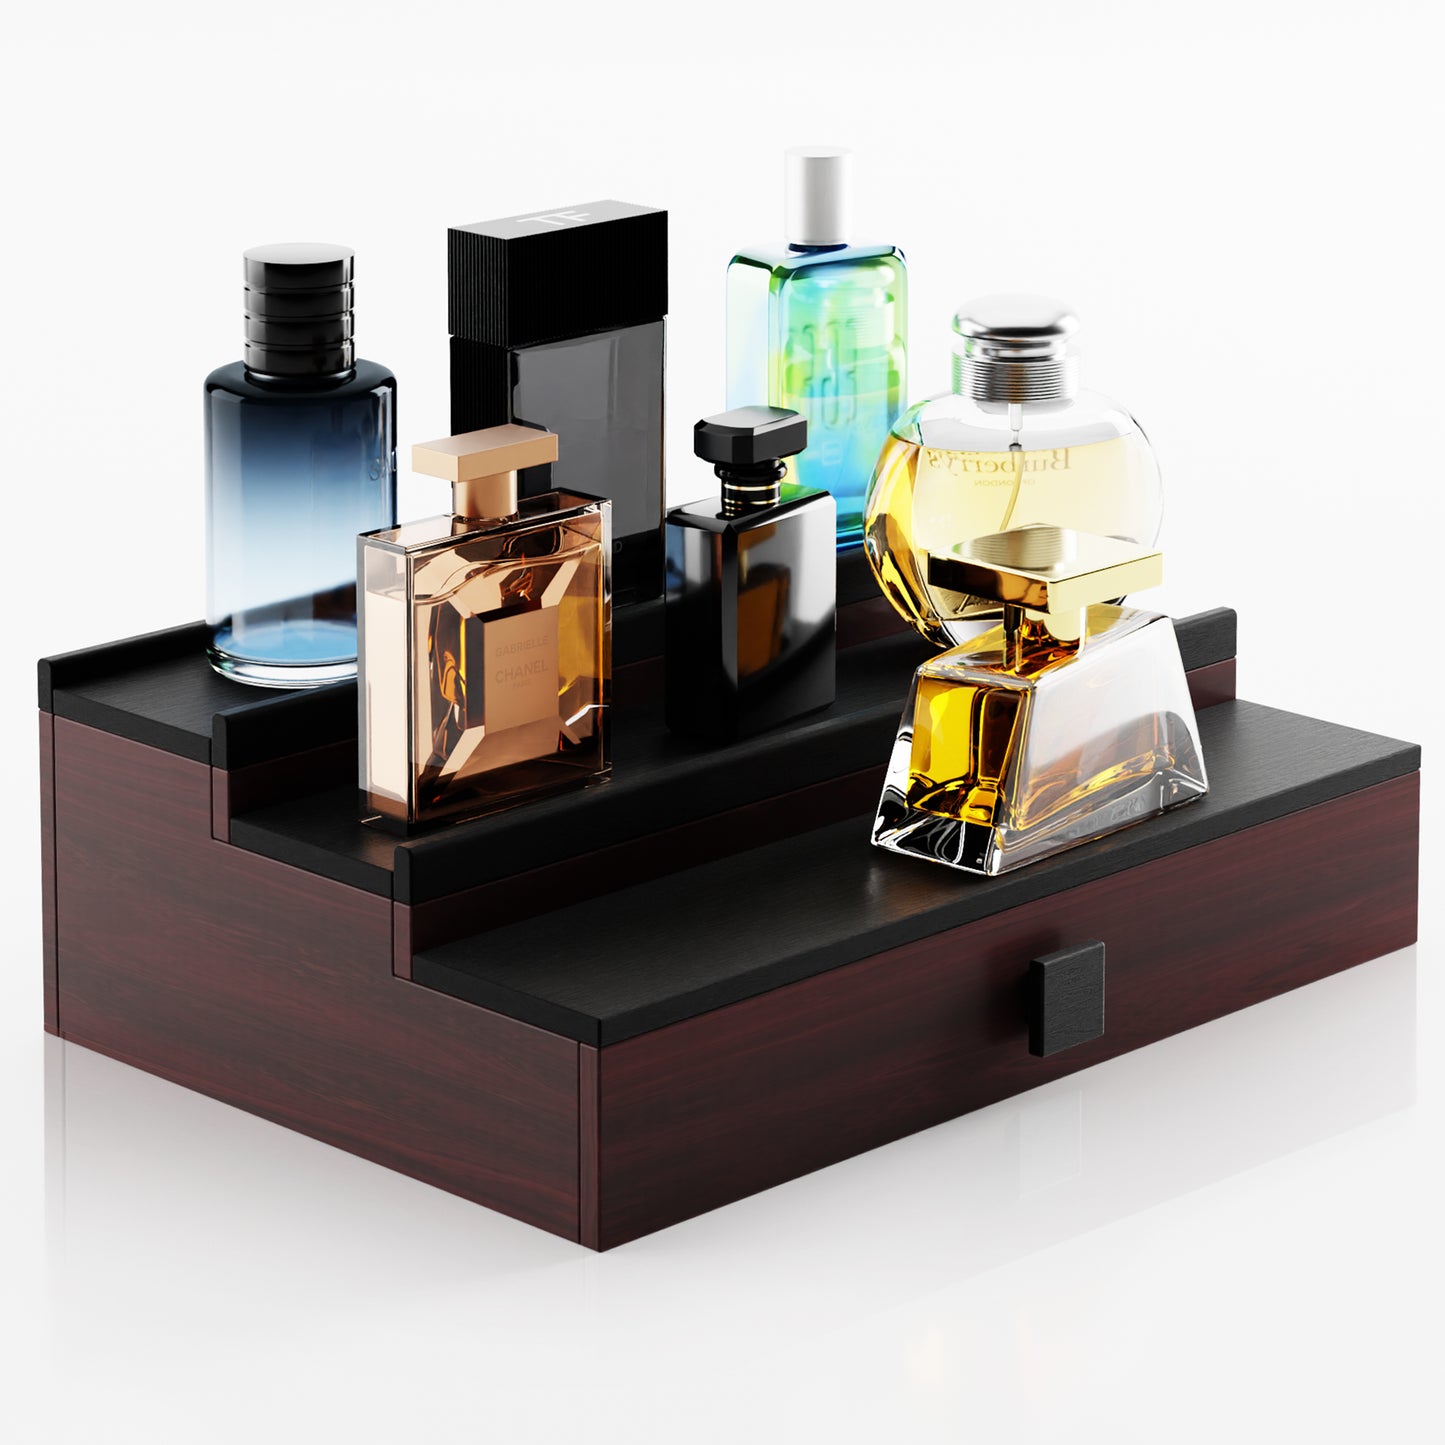 HOTCAN Wooden Cologne Organizer for Men - 3 Tier Display Shelf with Drawer and Hidden Compartment - Perfect for Organizing and Storing Colognes and Accessories - A Great Gift for Men